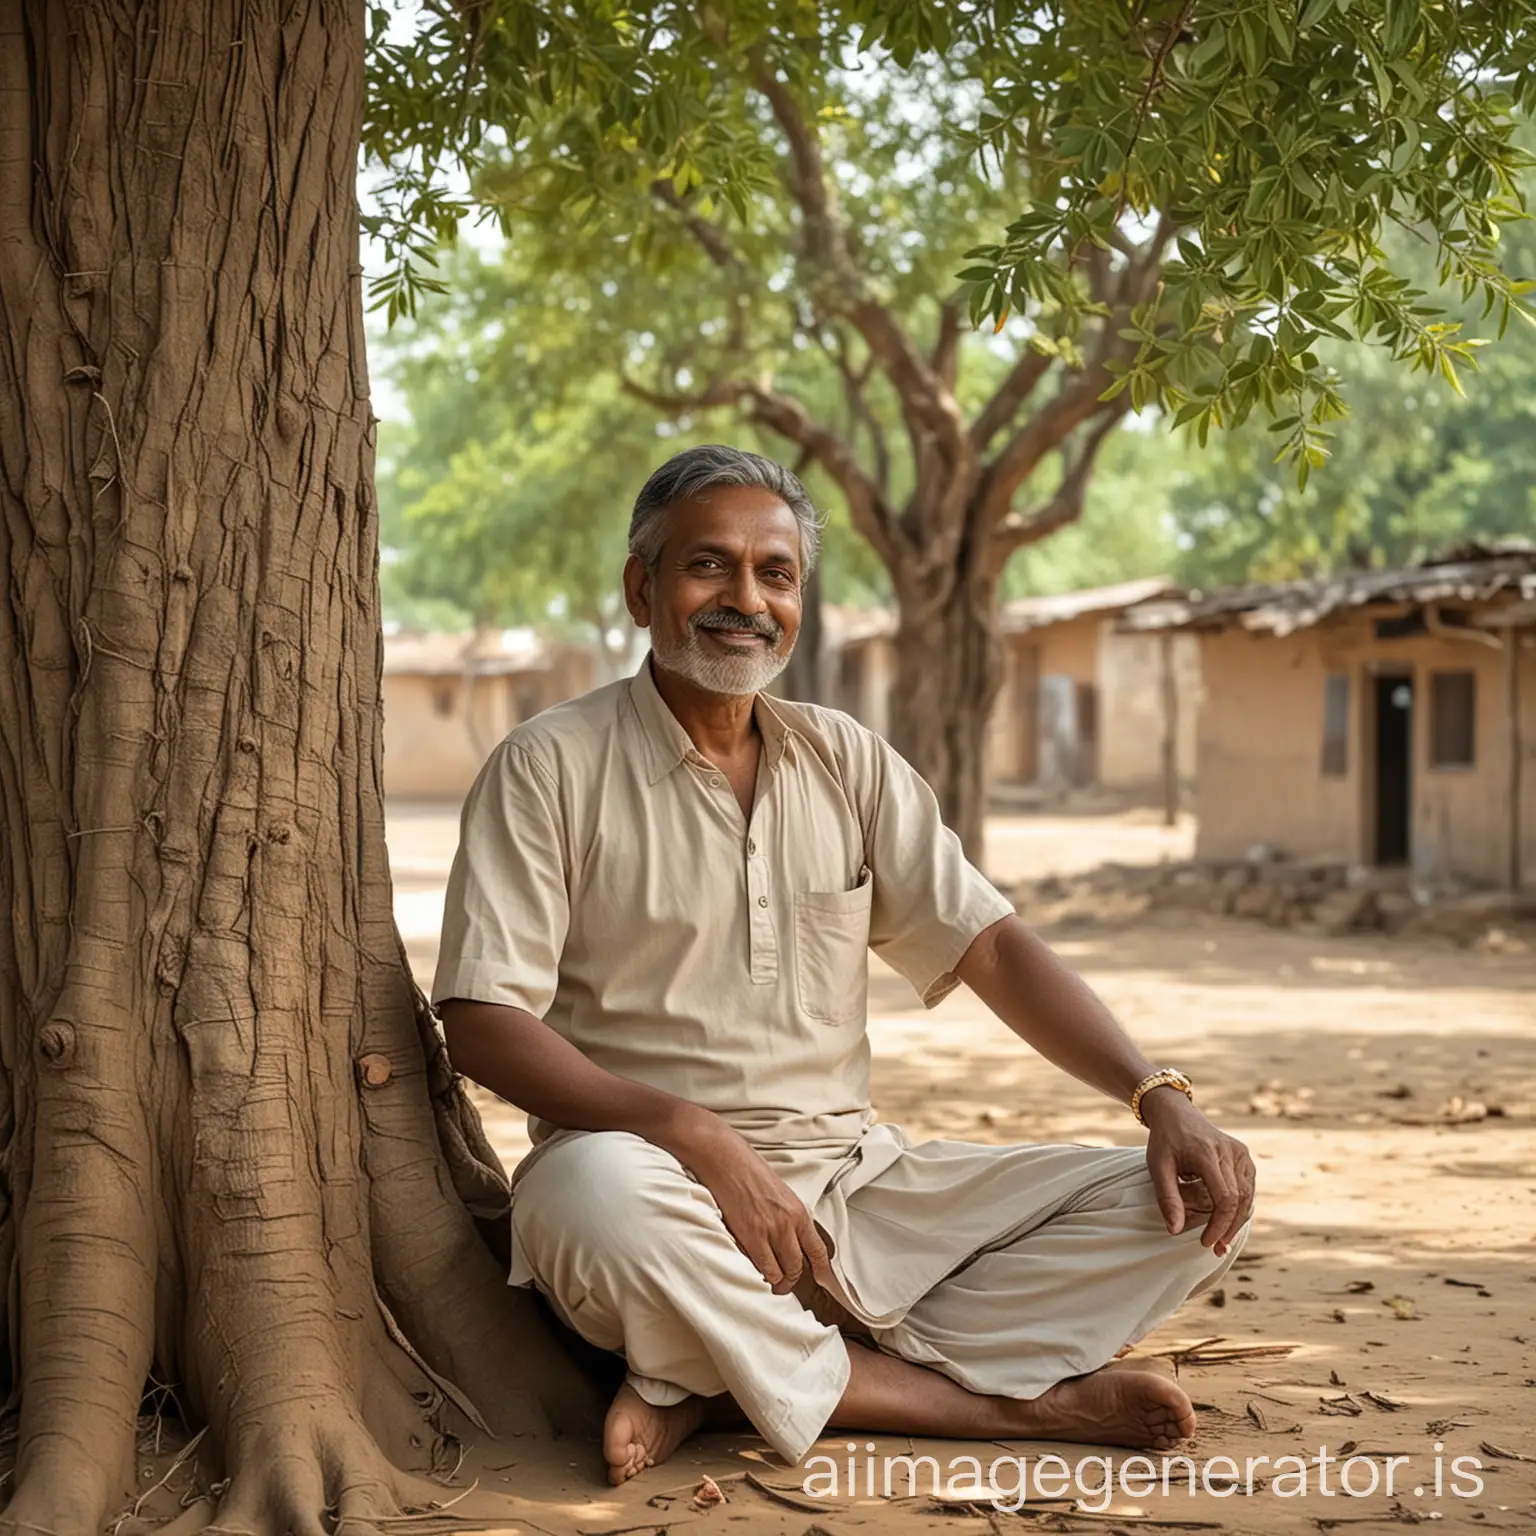 56 years old indian man with healthy body in village sitting under tree with a greeting posture